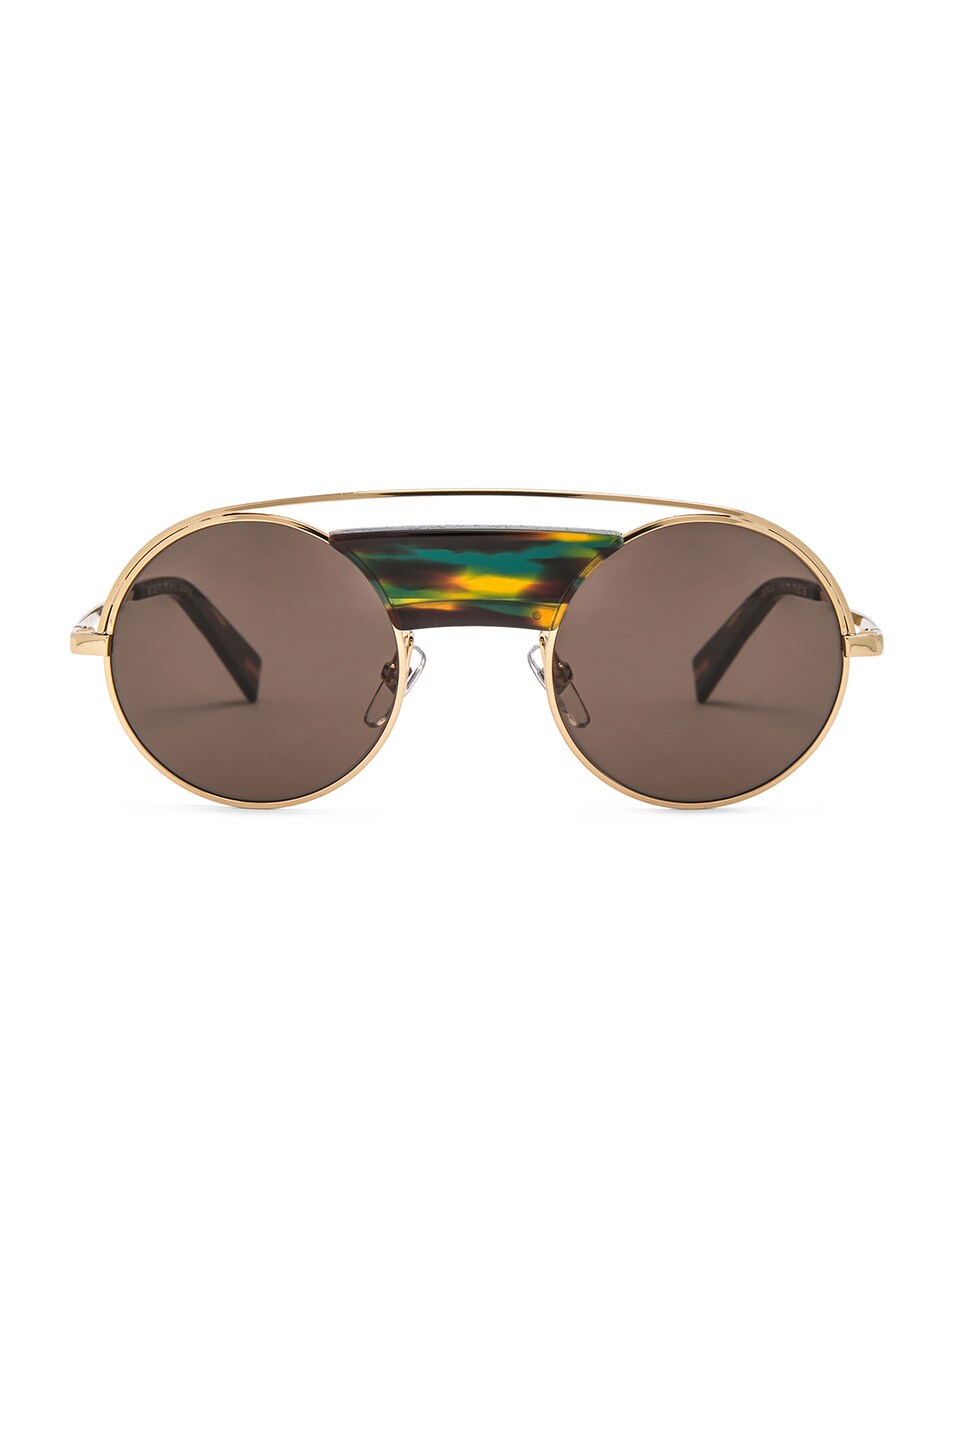 Image 1 of Oliver Peoples x Alain Mikli Round Sunglasses in Gold & Multi